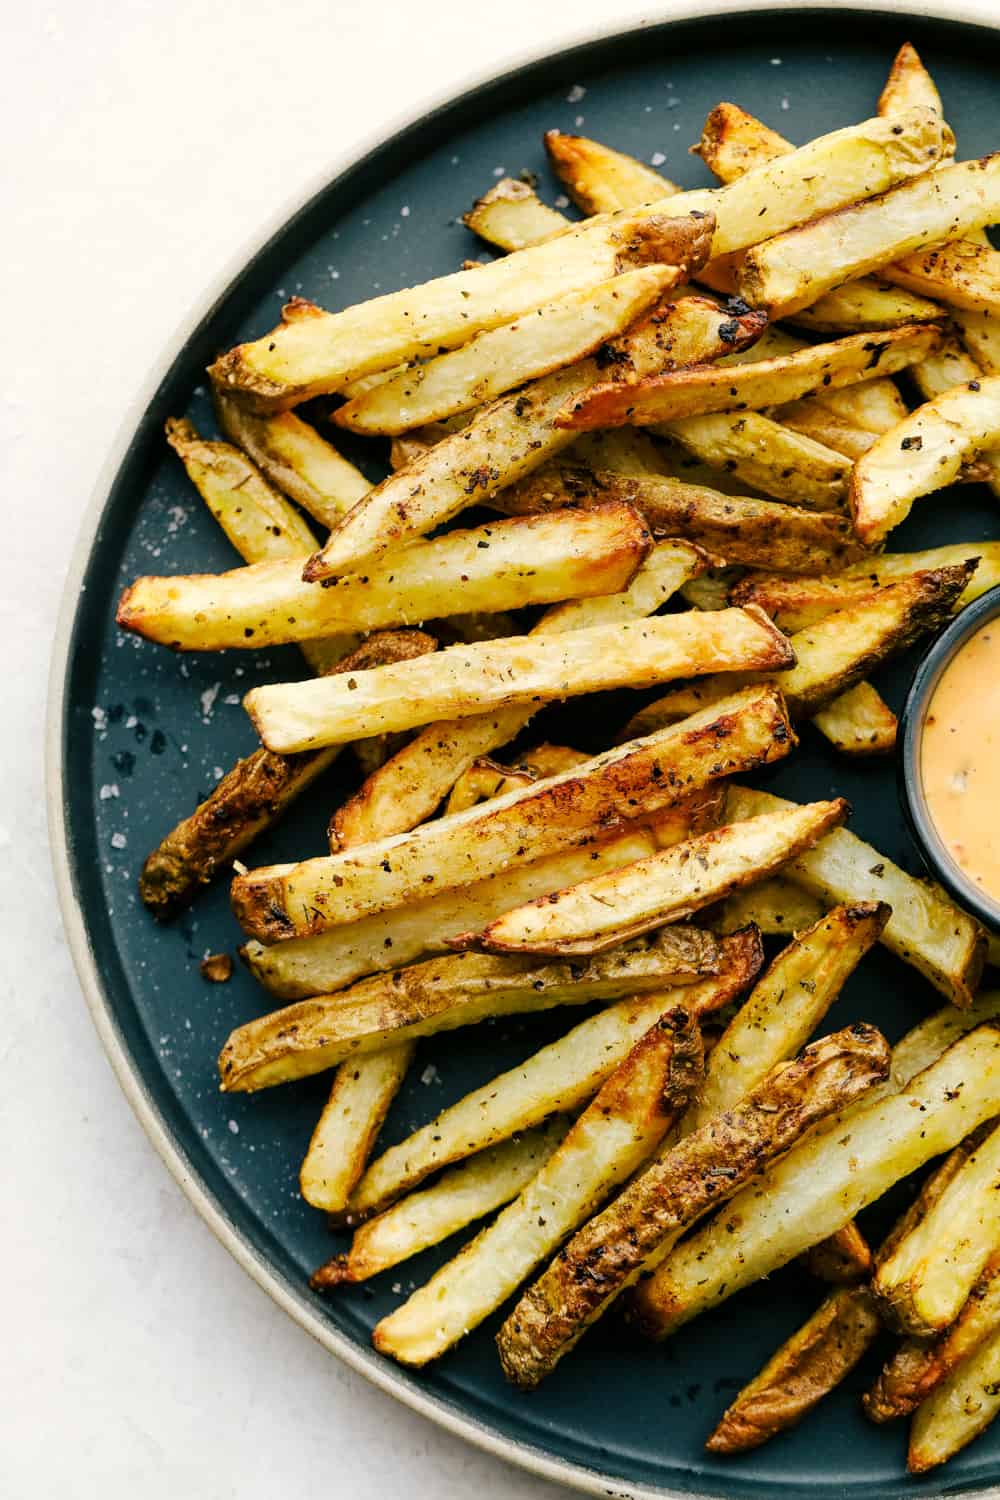 Crispy on the outside, tender on the inside, amazing air fryer french fries.